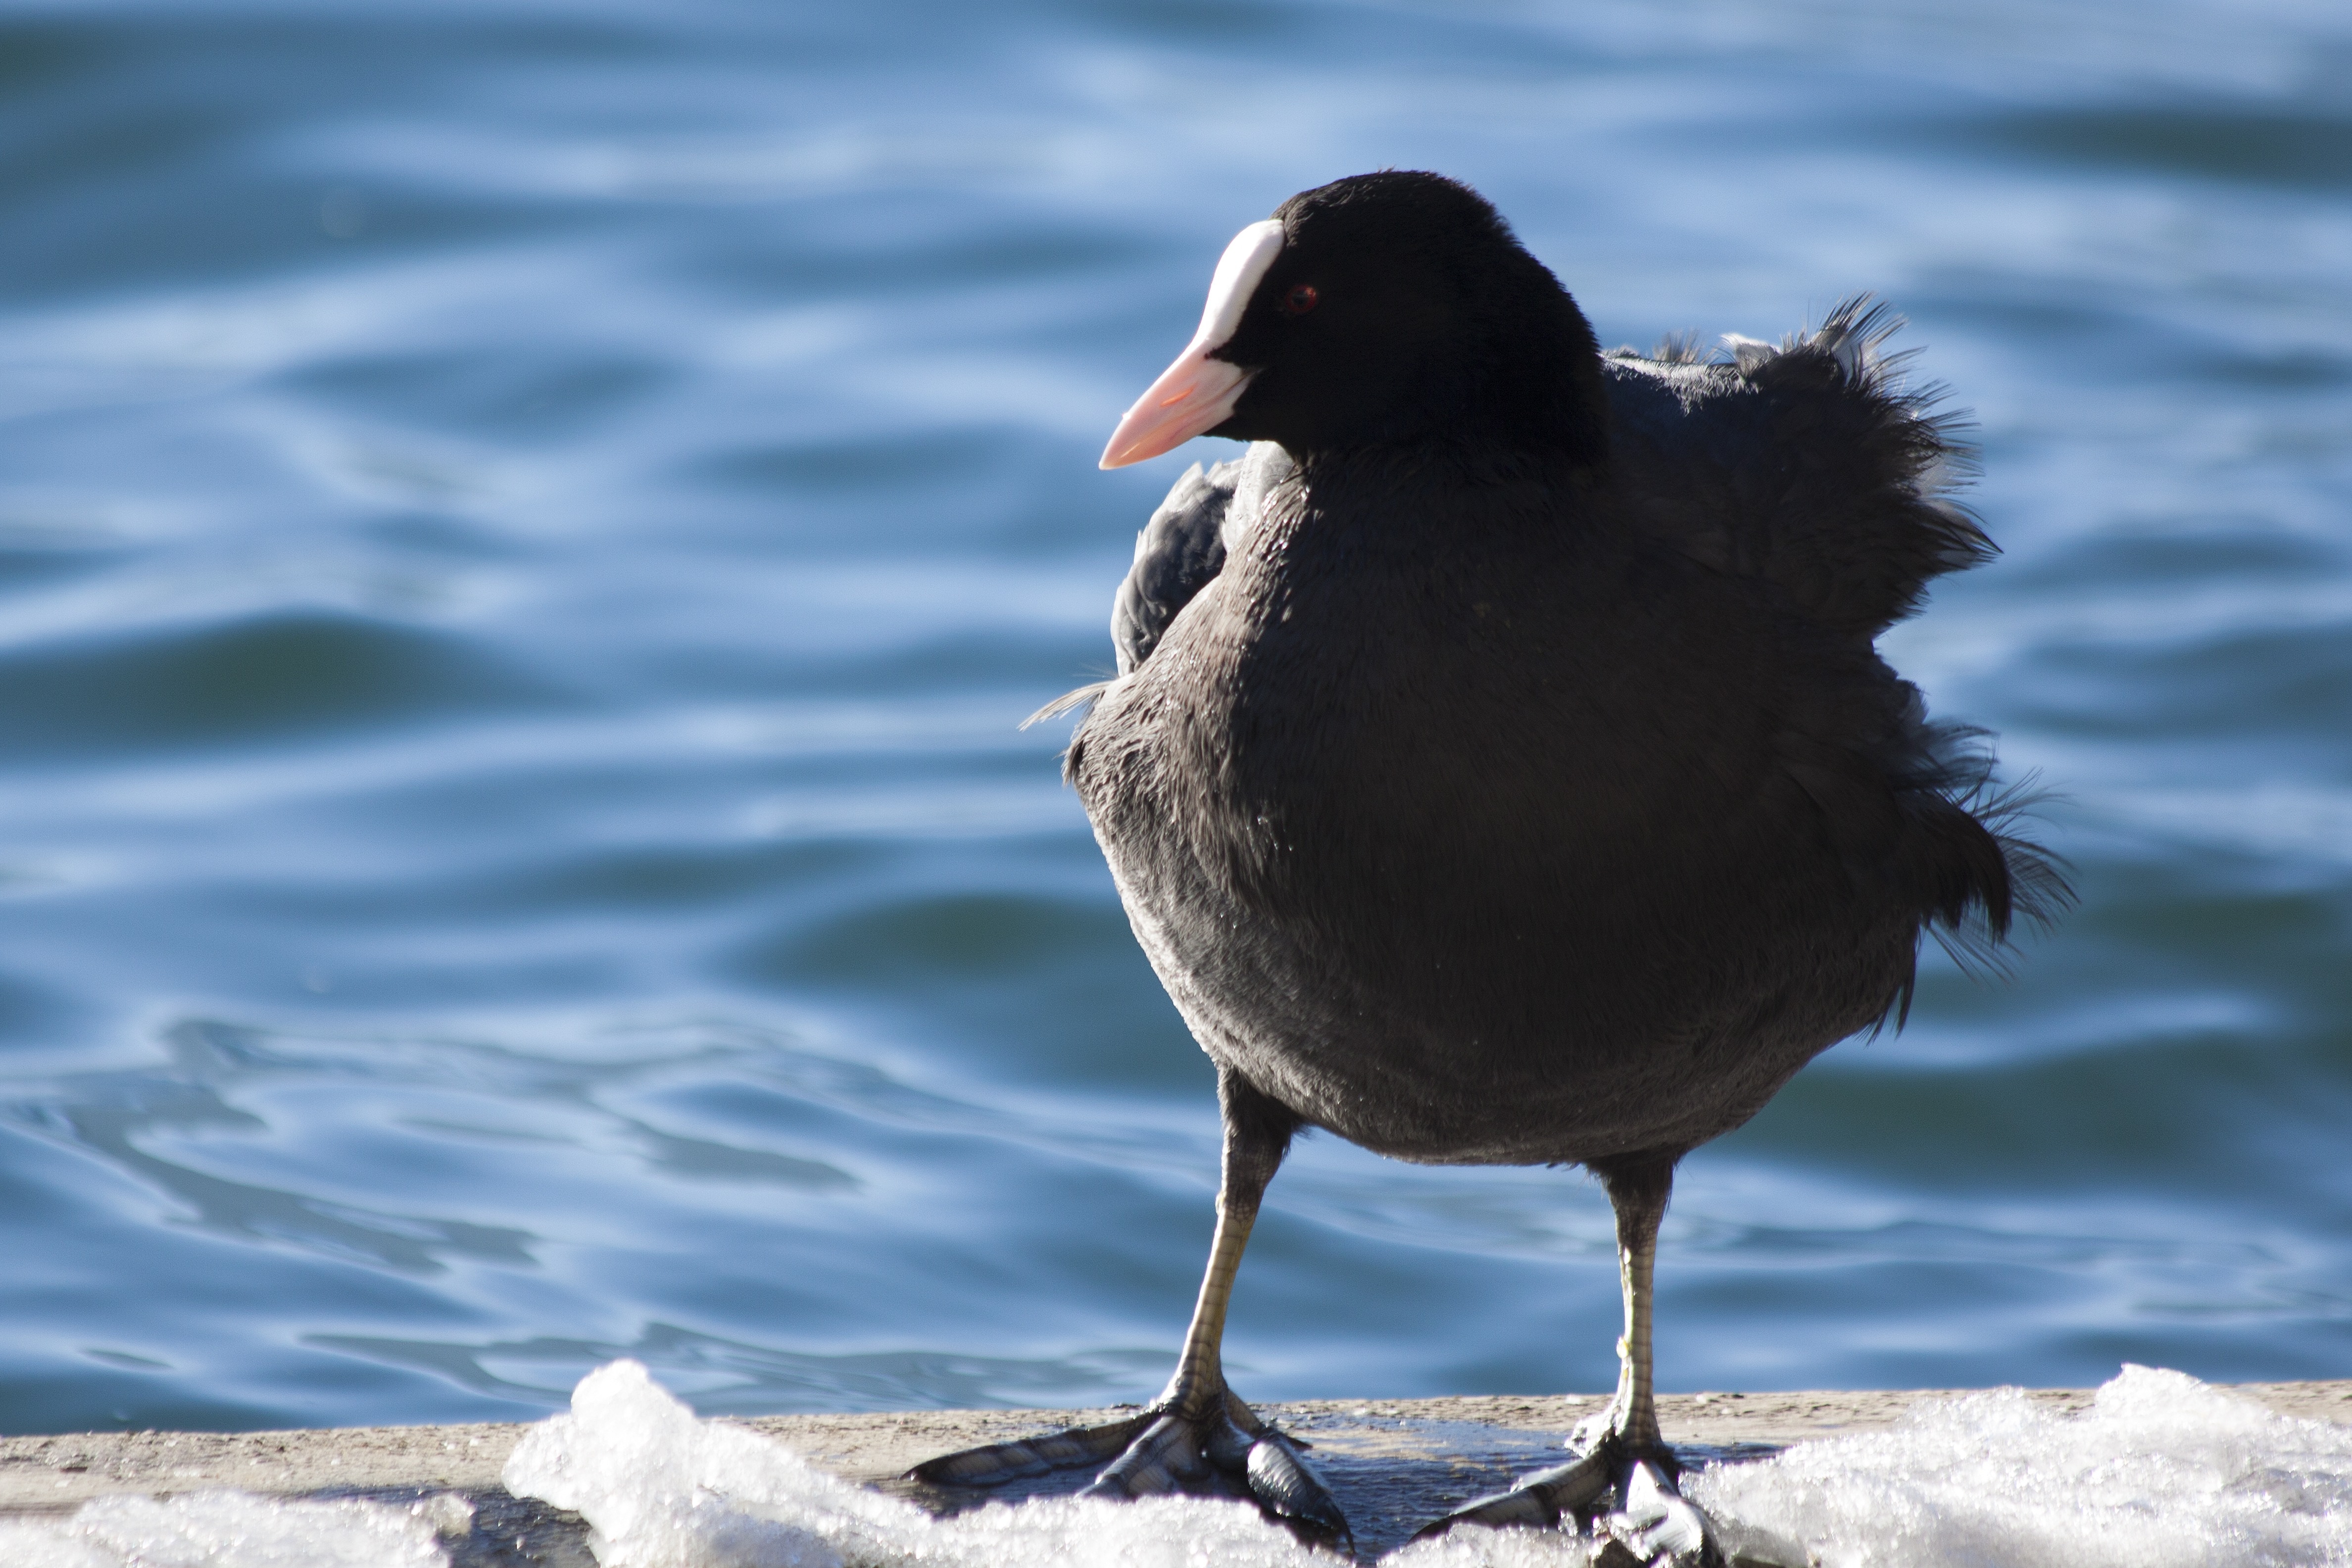 gray and black bird on gray concrete surface beside body of water